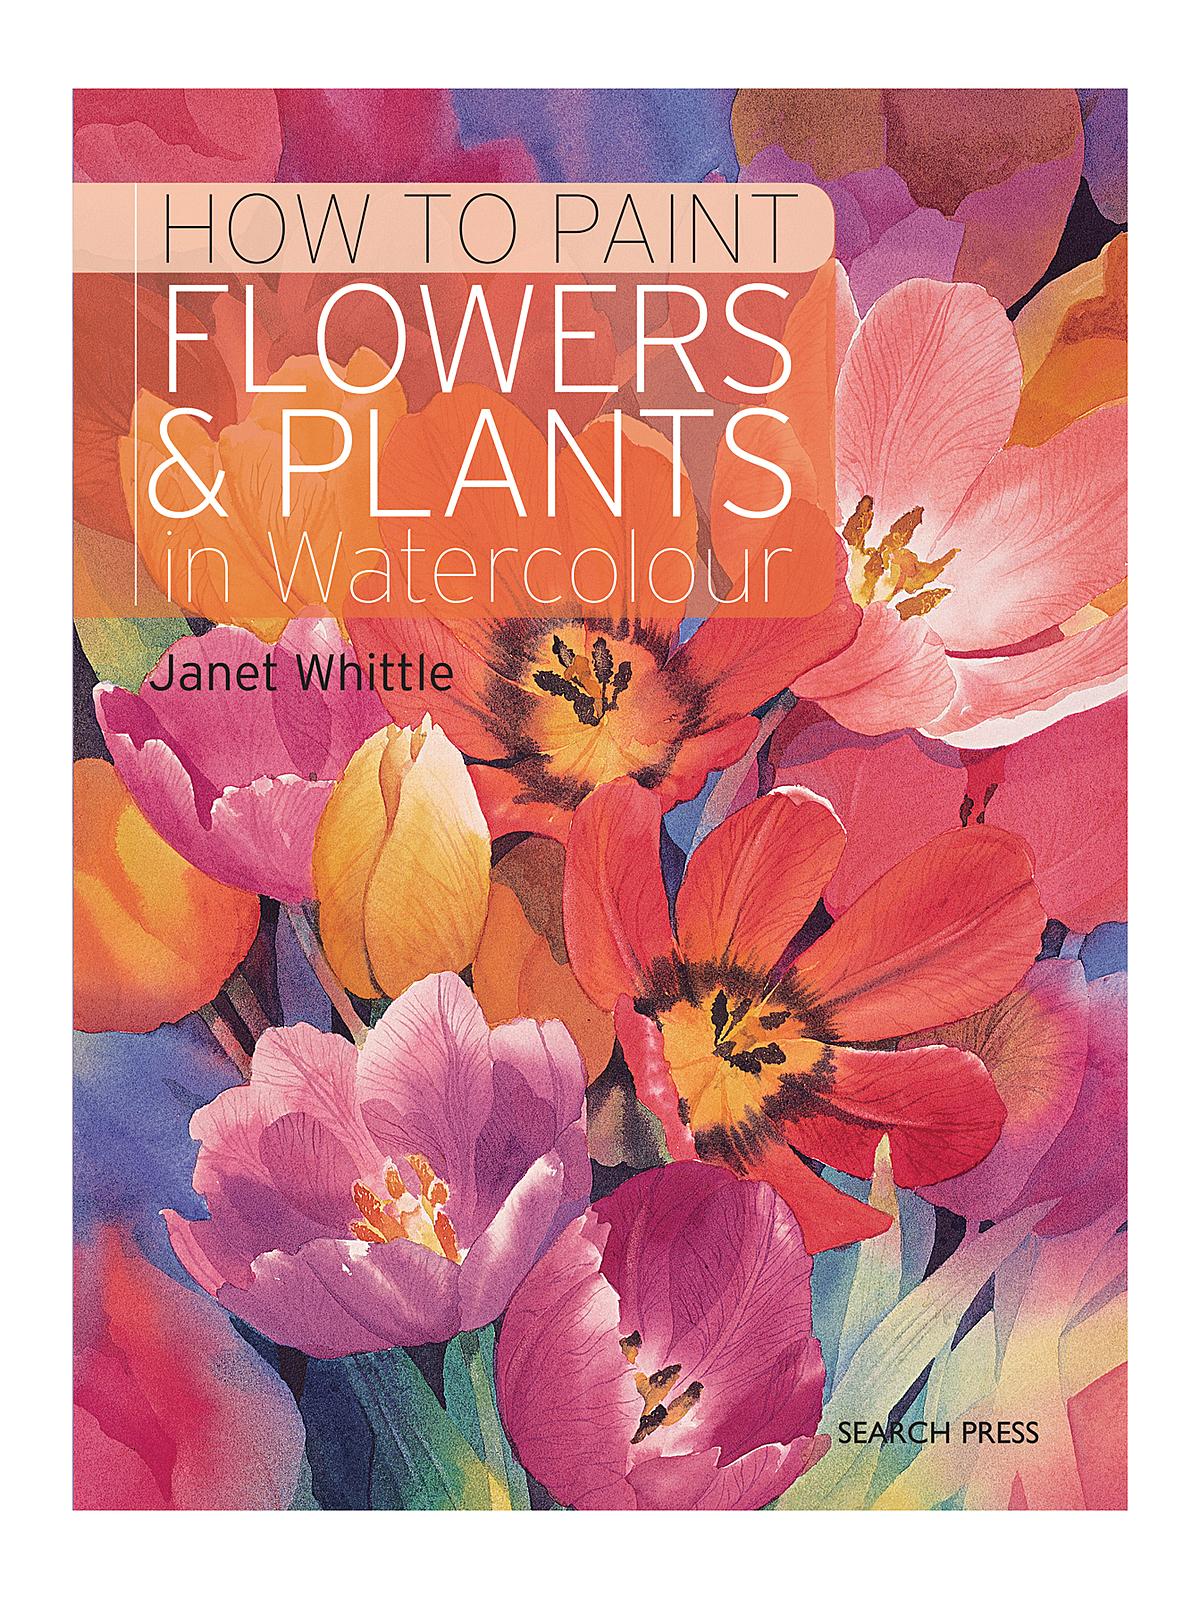 How To Paint Flowers & Plants Each